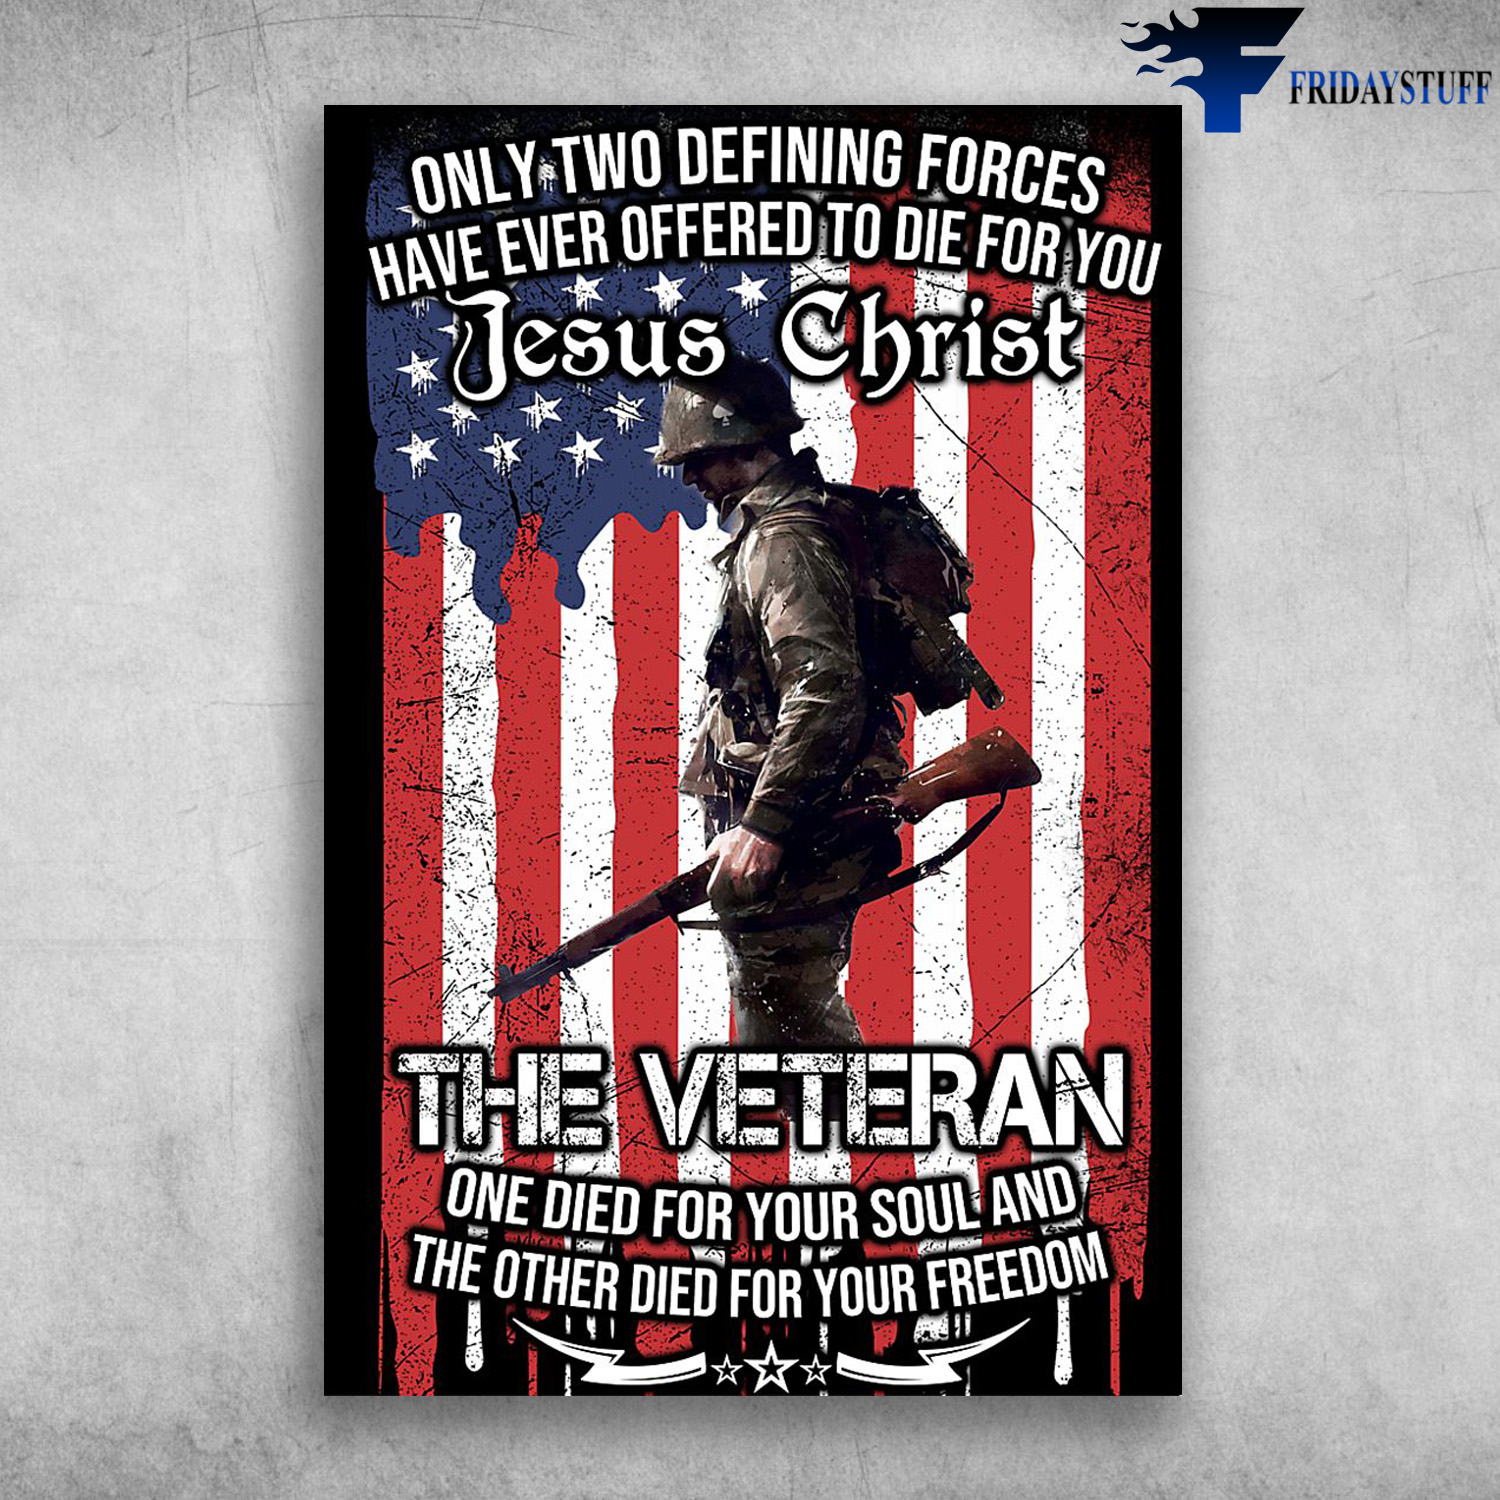 American Veteran - Only Two Defining Forces Have Ever Offered To Die For You, Jesus Christ, The Veteran One Died For Your Soul And The Other Died For Your Freedom